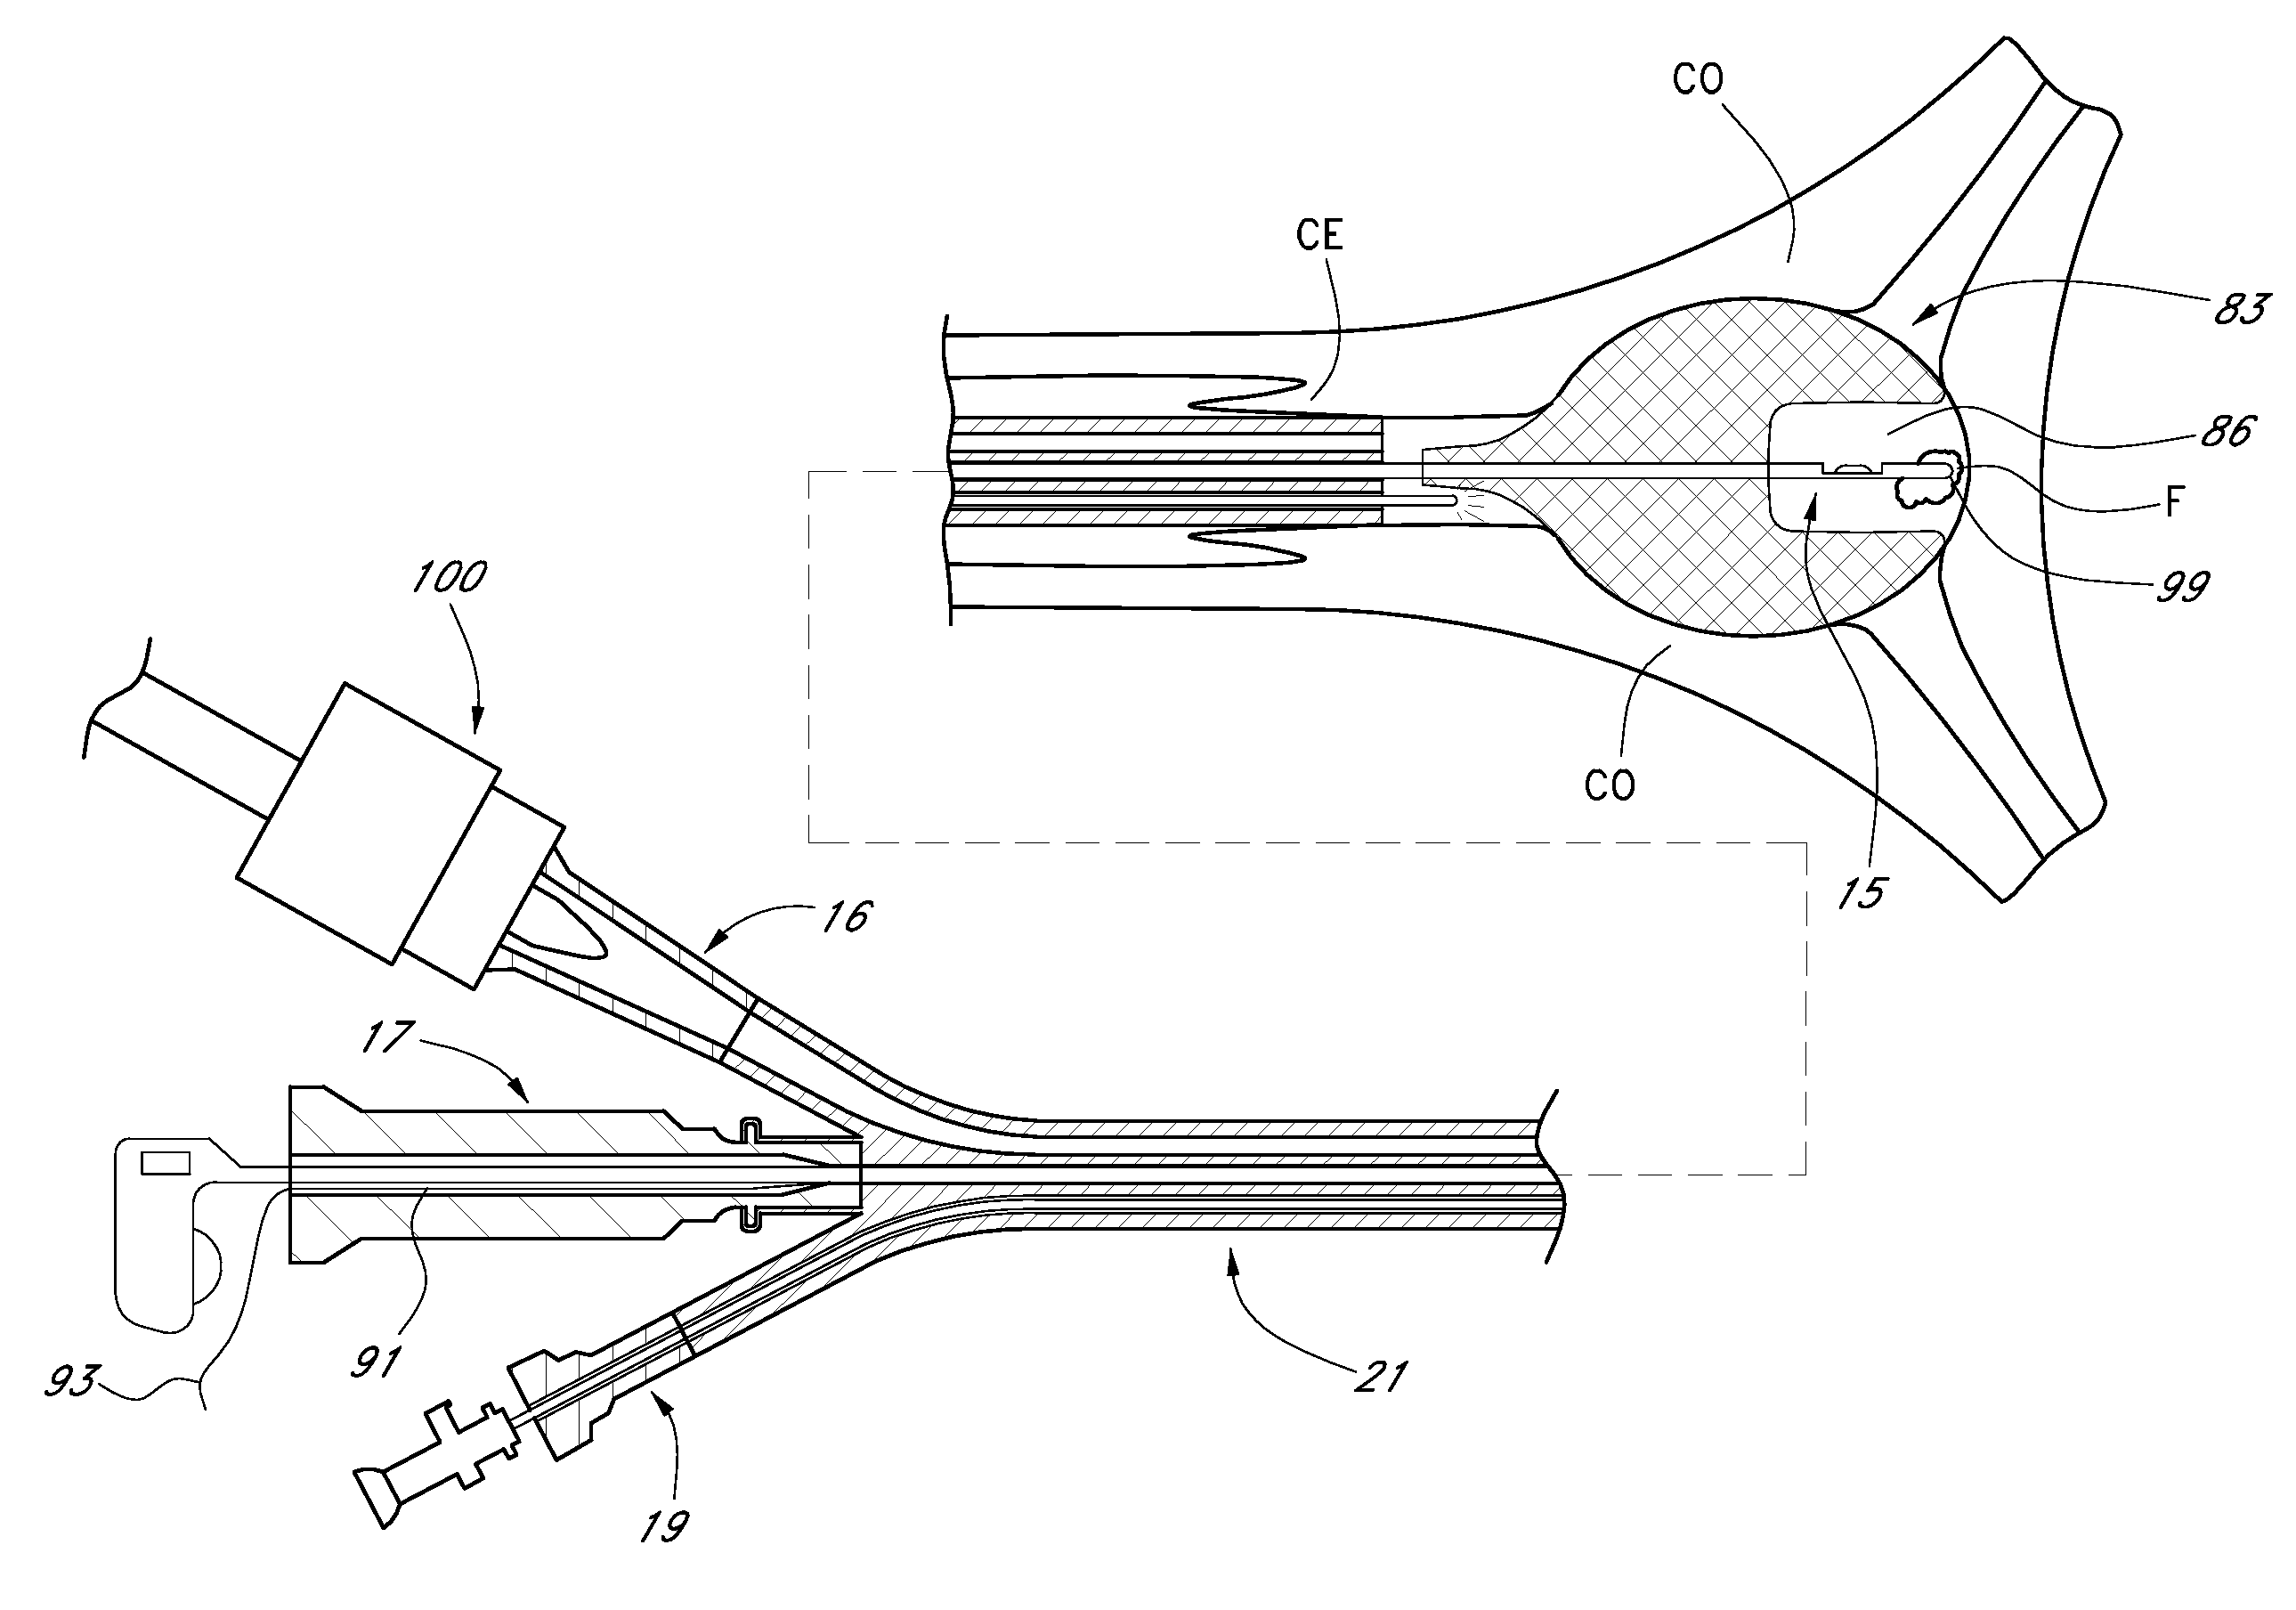 Methods for performing a medical procedure